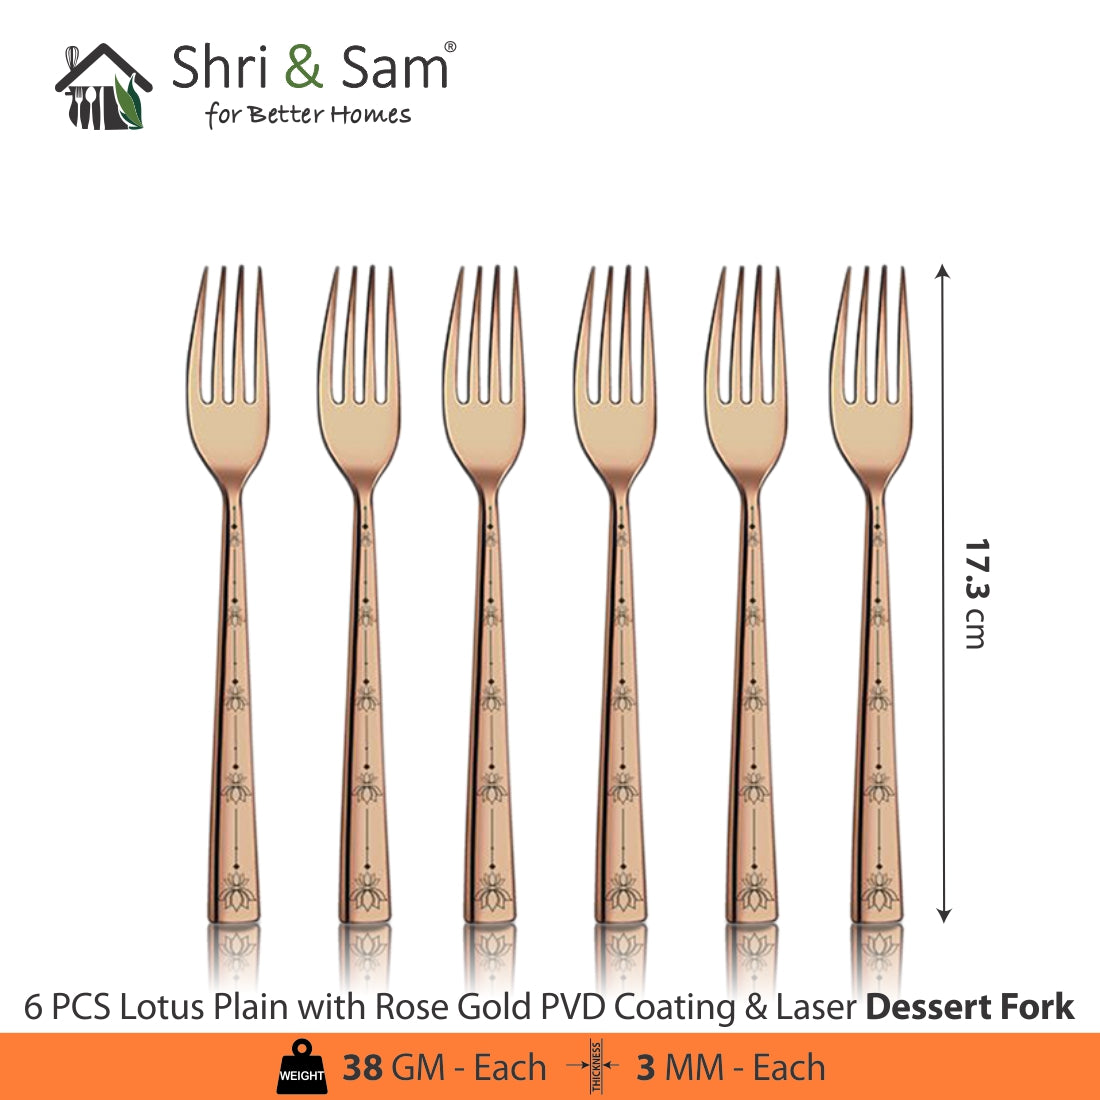 Stainless Steel Cutlery with Rose Gold PVD Coating & Laser Lotus Plain